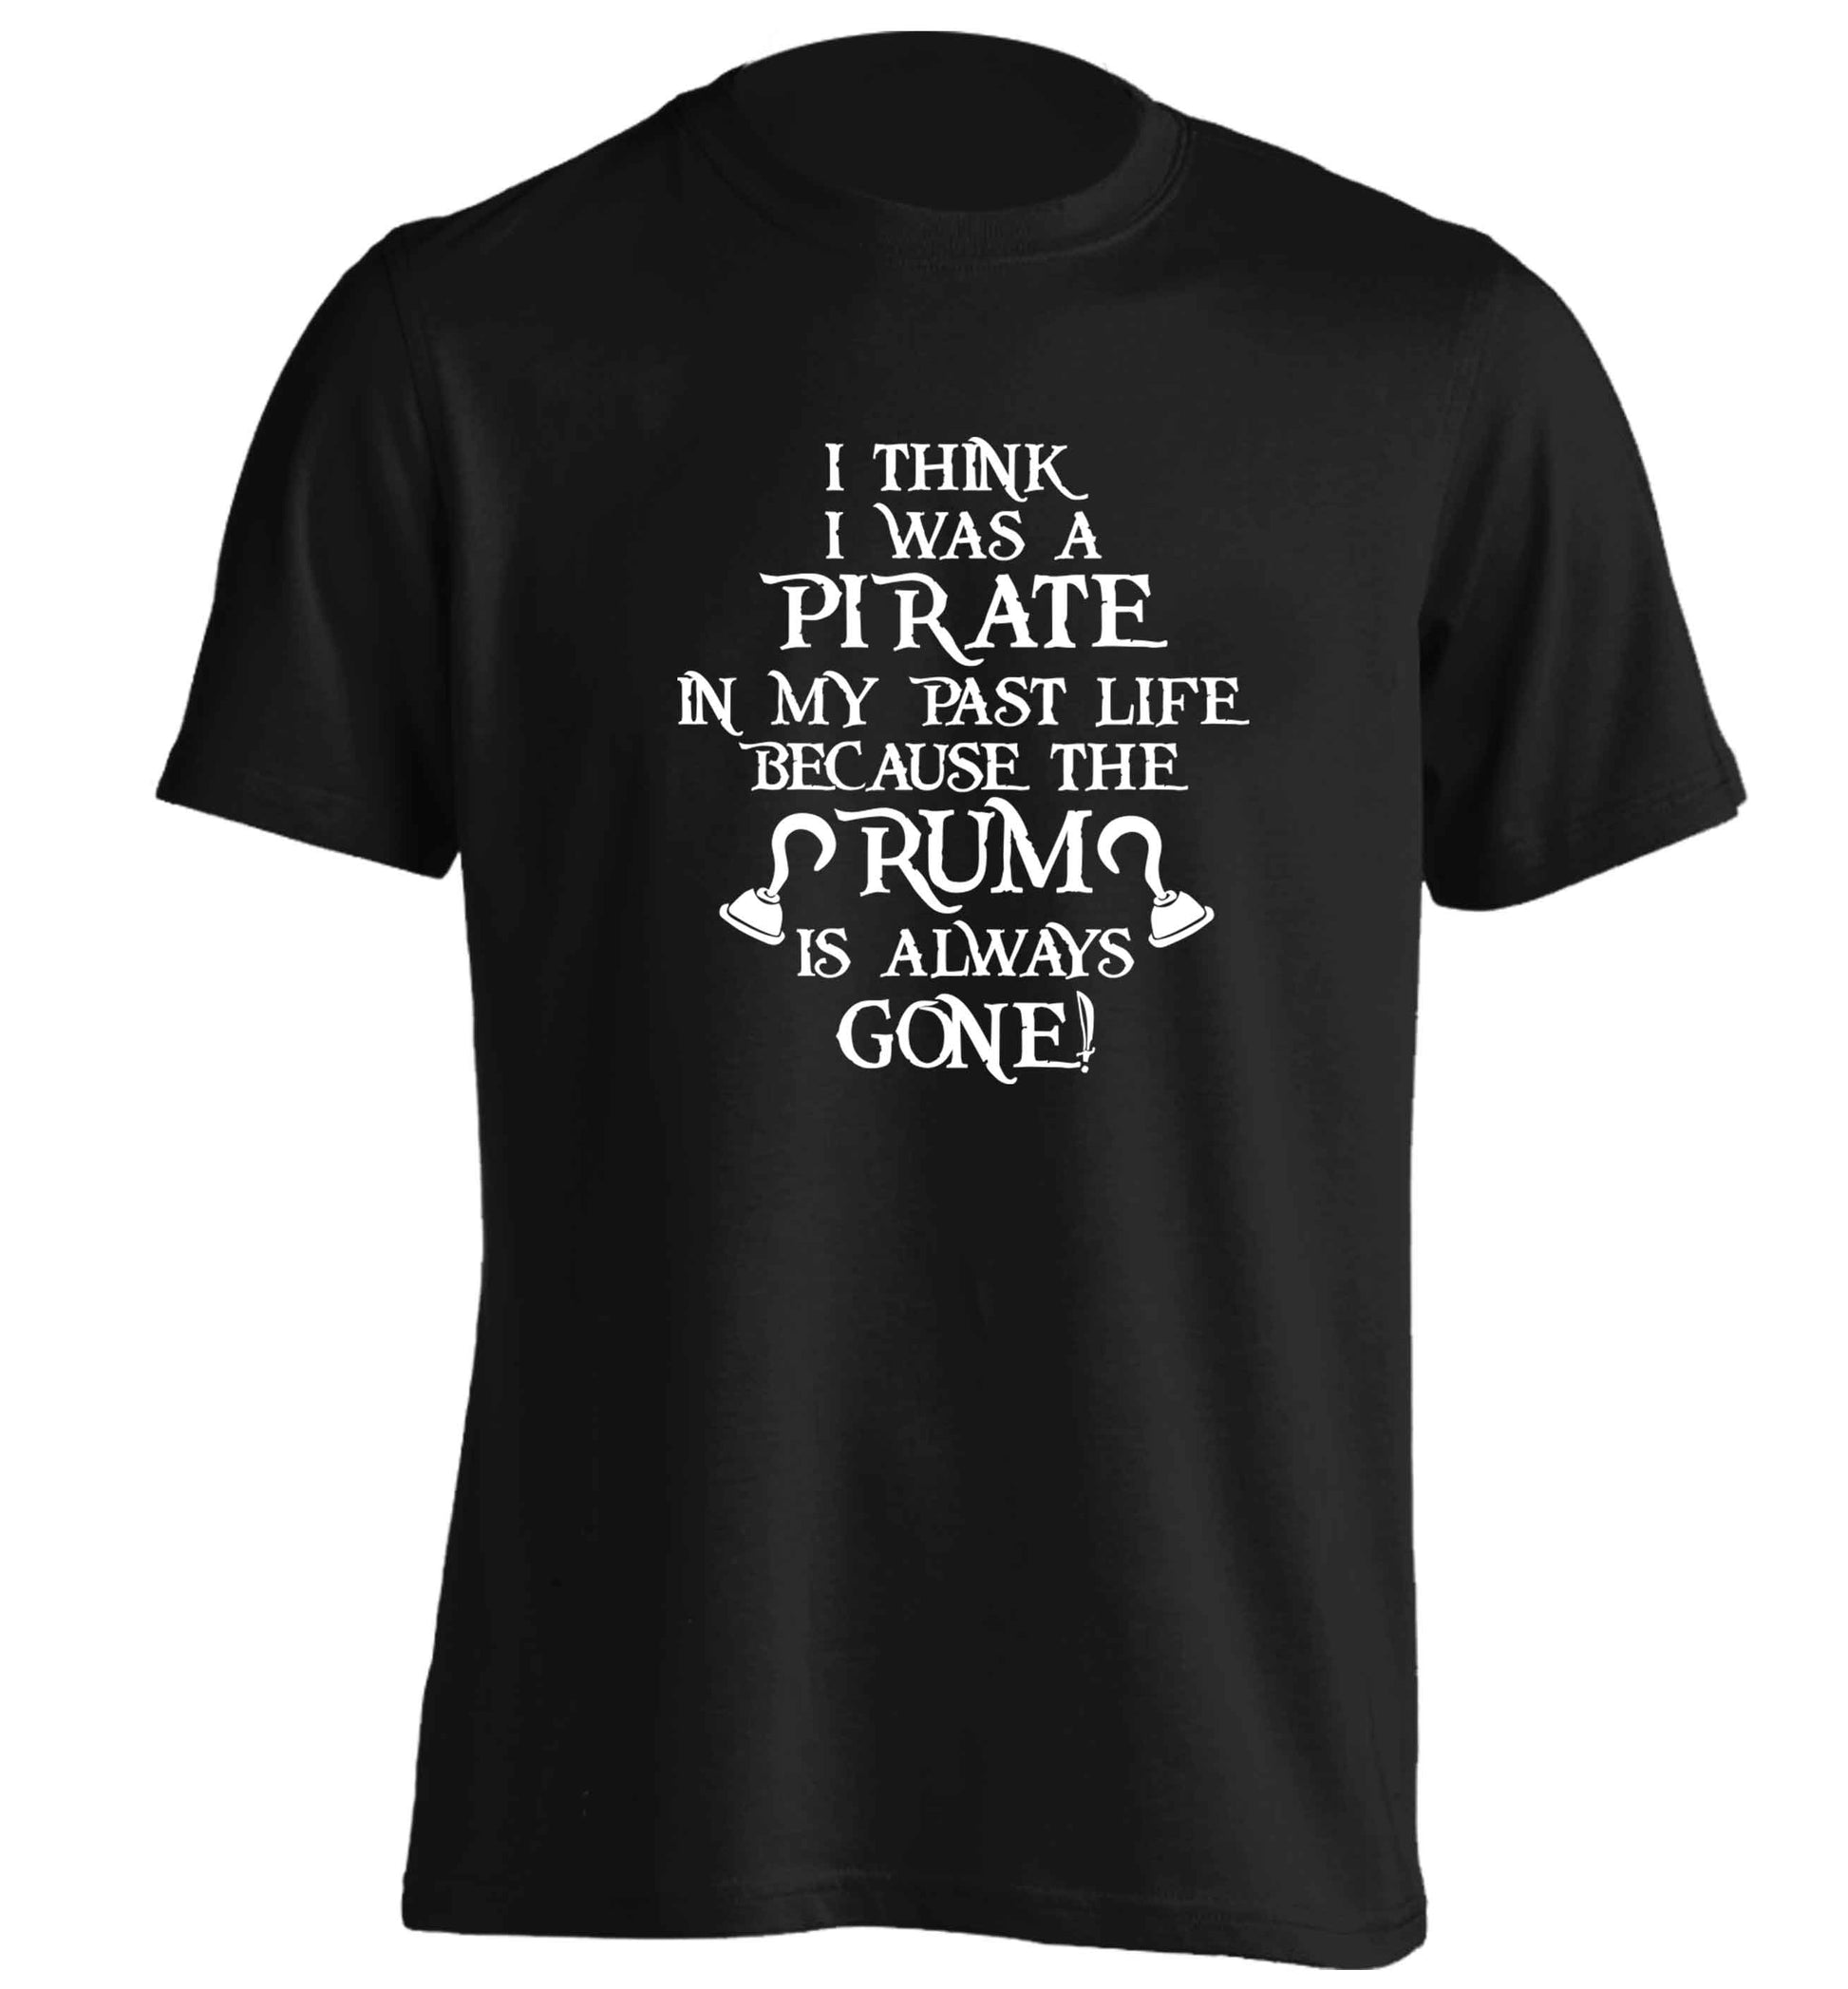 I think I was a pirate in my past life the rum is always gone adults unisex black Tshirt 2XL